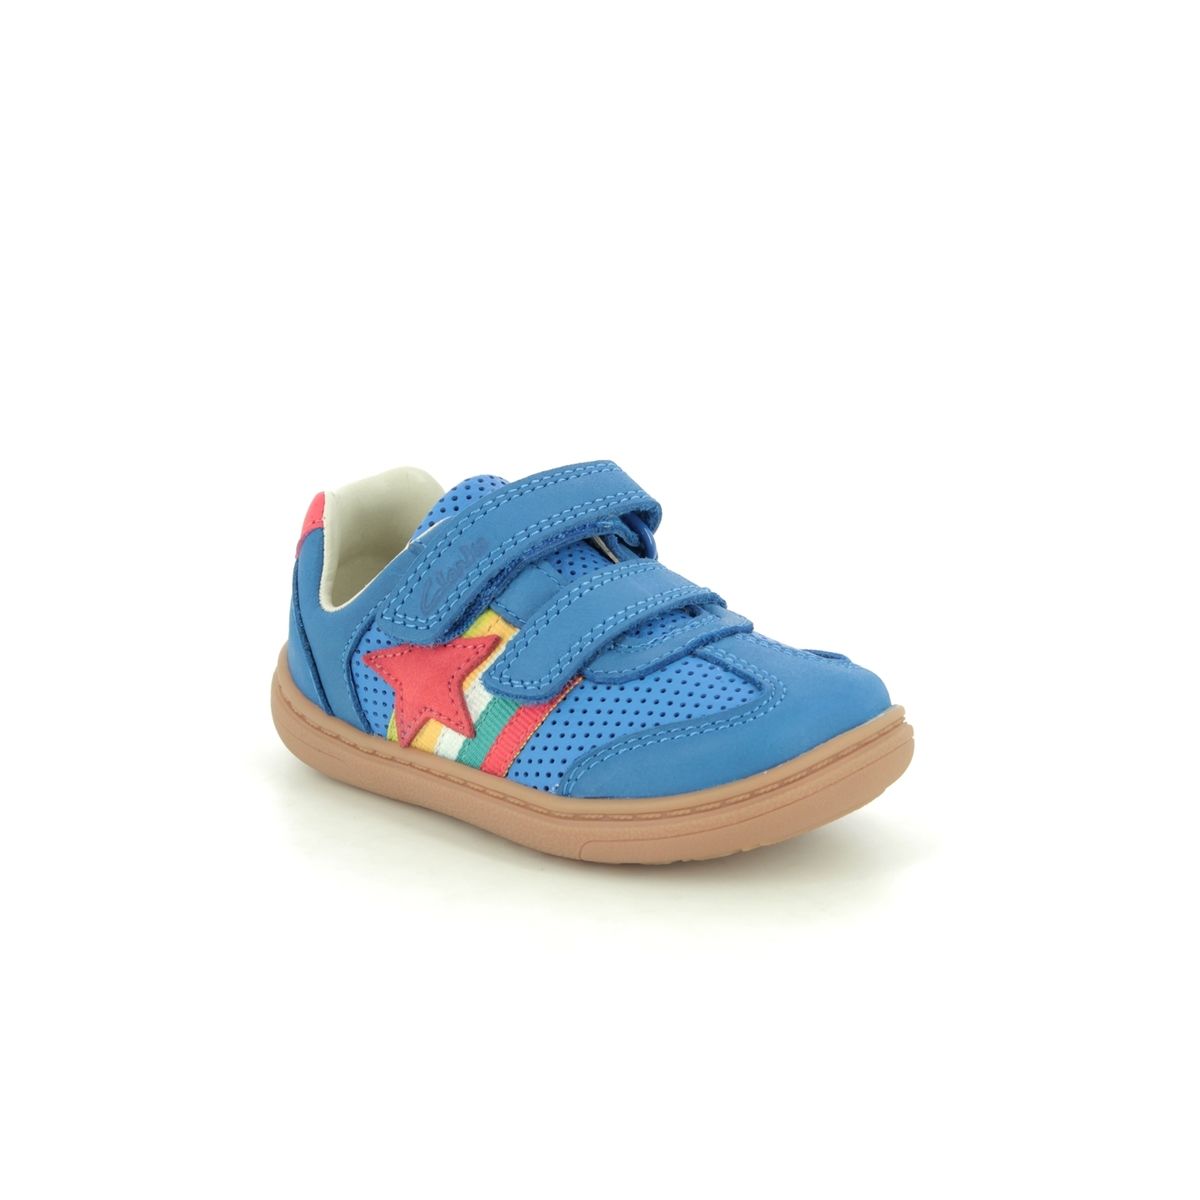 Clarks Flash Hot T G Fit BLUE LEATHER 